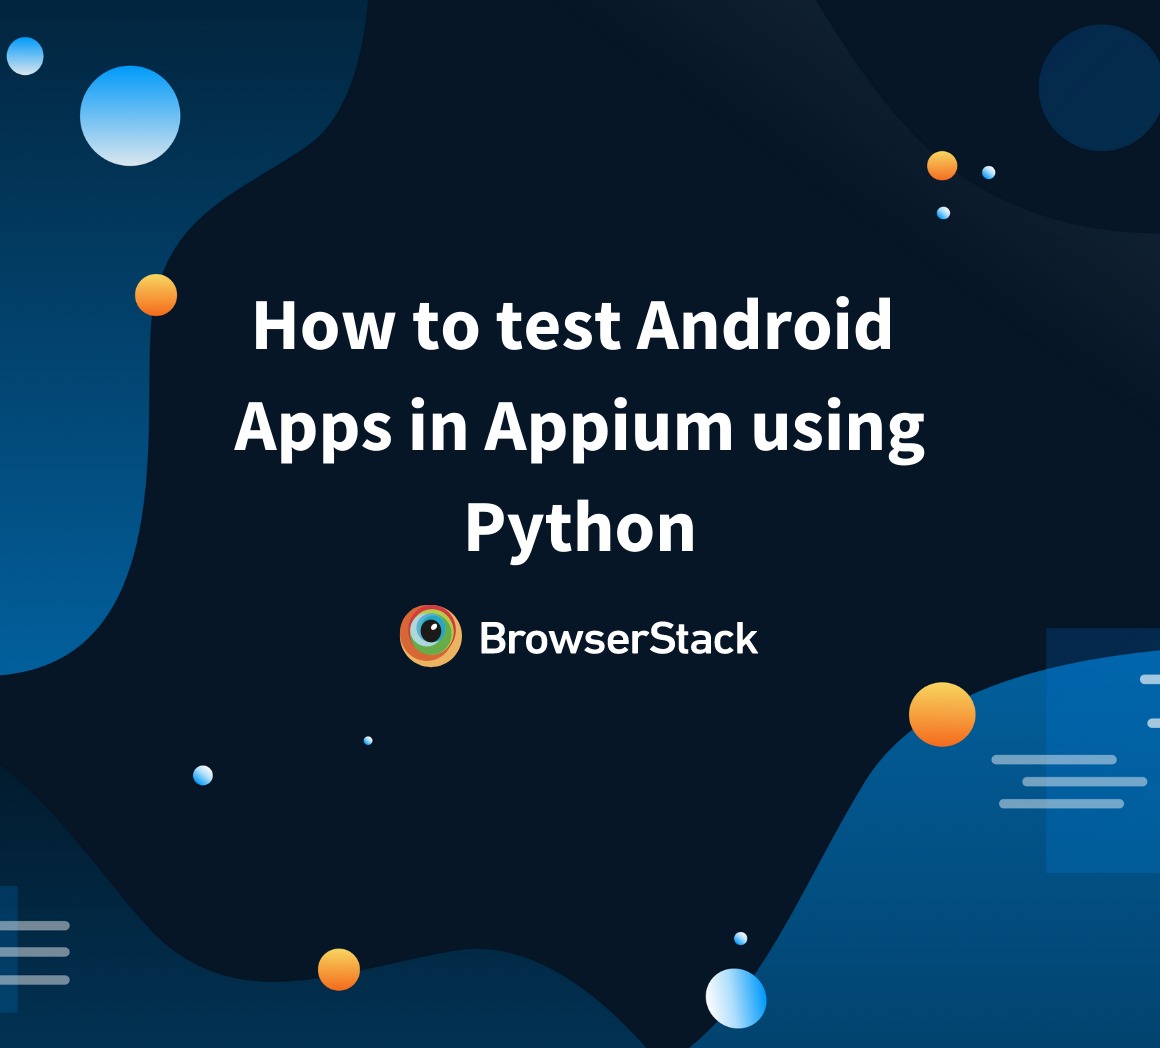 How to test Android apps in Appium using Python